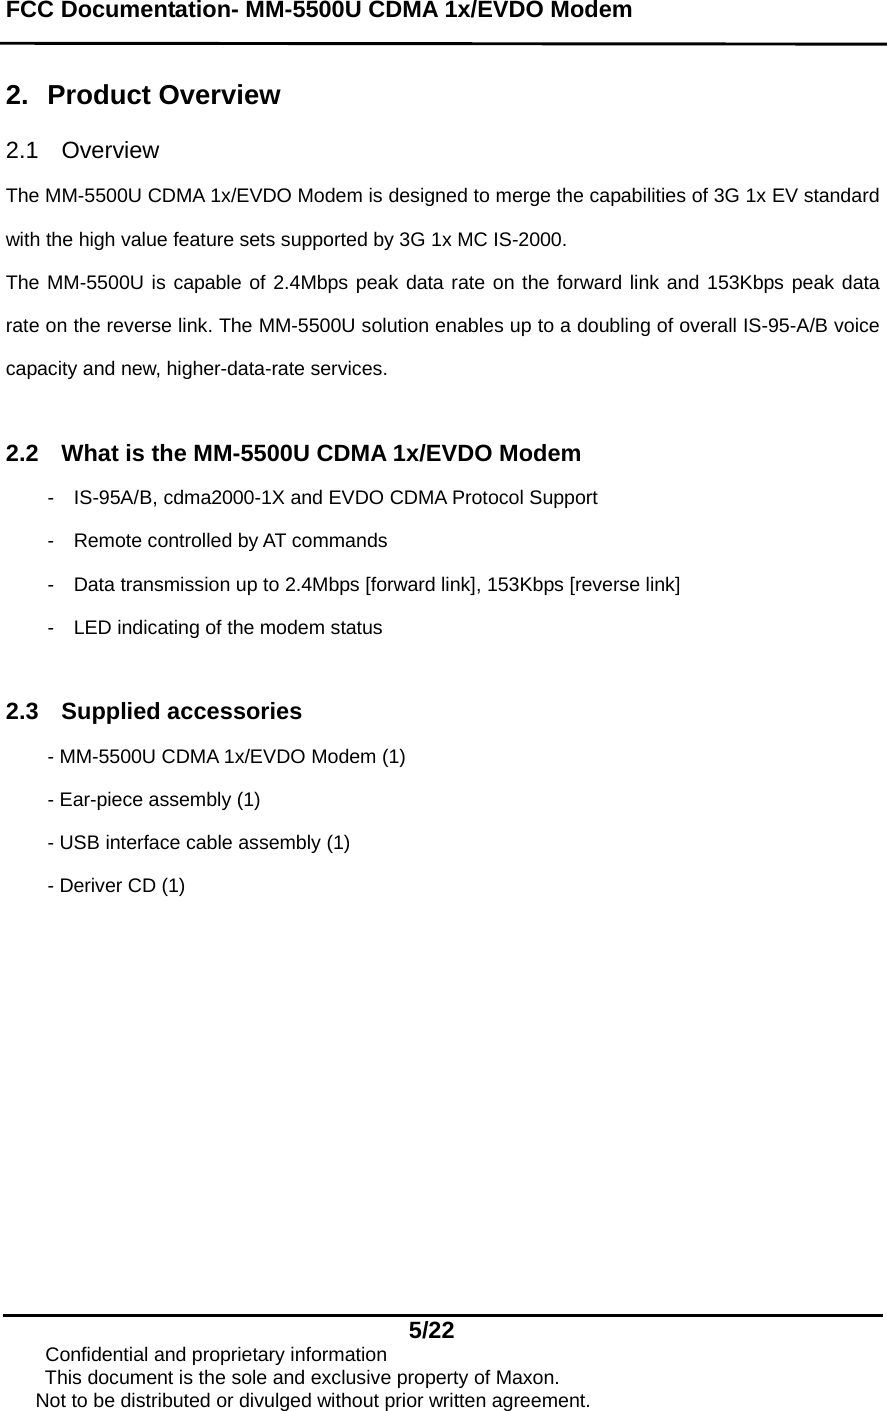 FCC Documentation- MM-5500U CDMA 1x/EVDO Modem   5/22      Confidential and proprietary information This document is the sole and exclusive property of Maxon.       Not to be distributed or divulged without prior written agreement.  2. Product Overview  2.1 Overview  The MM-5500U CDMA 1x/EVDO Modem is designed to merge the capabilities of 3G 1x EV standard with the high value feature sets supported by 3G 1x MC IS-2000. The MM-5500U is capable of 2.4Mbps peak data rate on the forward link and 153Kbps peak data rate on the reverse link. The MM-5500U solution enables up to a doubling of overall IS-95-A/B voice capacity and new, higher-data-rate services.  2.2  What is the MM-5500U CDMA 1x/EVDO Modem -    IS-95A/B, cdma2000-1X and EVDO CDMA Protocol Support -    Remote controlled by AT commands -    Data transmission up to 2.4Mbps [forward link], 153Kbps [reverse link] -    LED indicating of the modem status  2.3 Supplied accessories - MM-5500U CDMA 1x/EVDO Modem (1) - Ear-piece assembly (1) - USB interface cable assembly (1) - Deriver CD (1)   